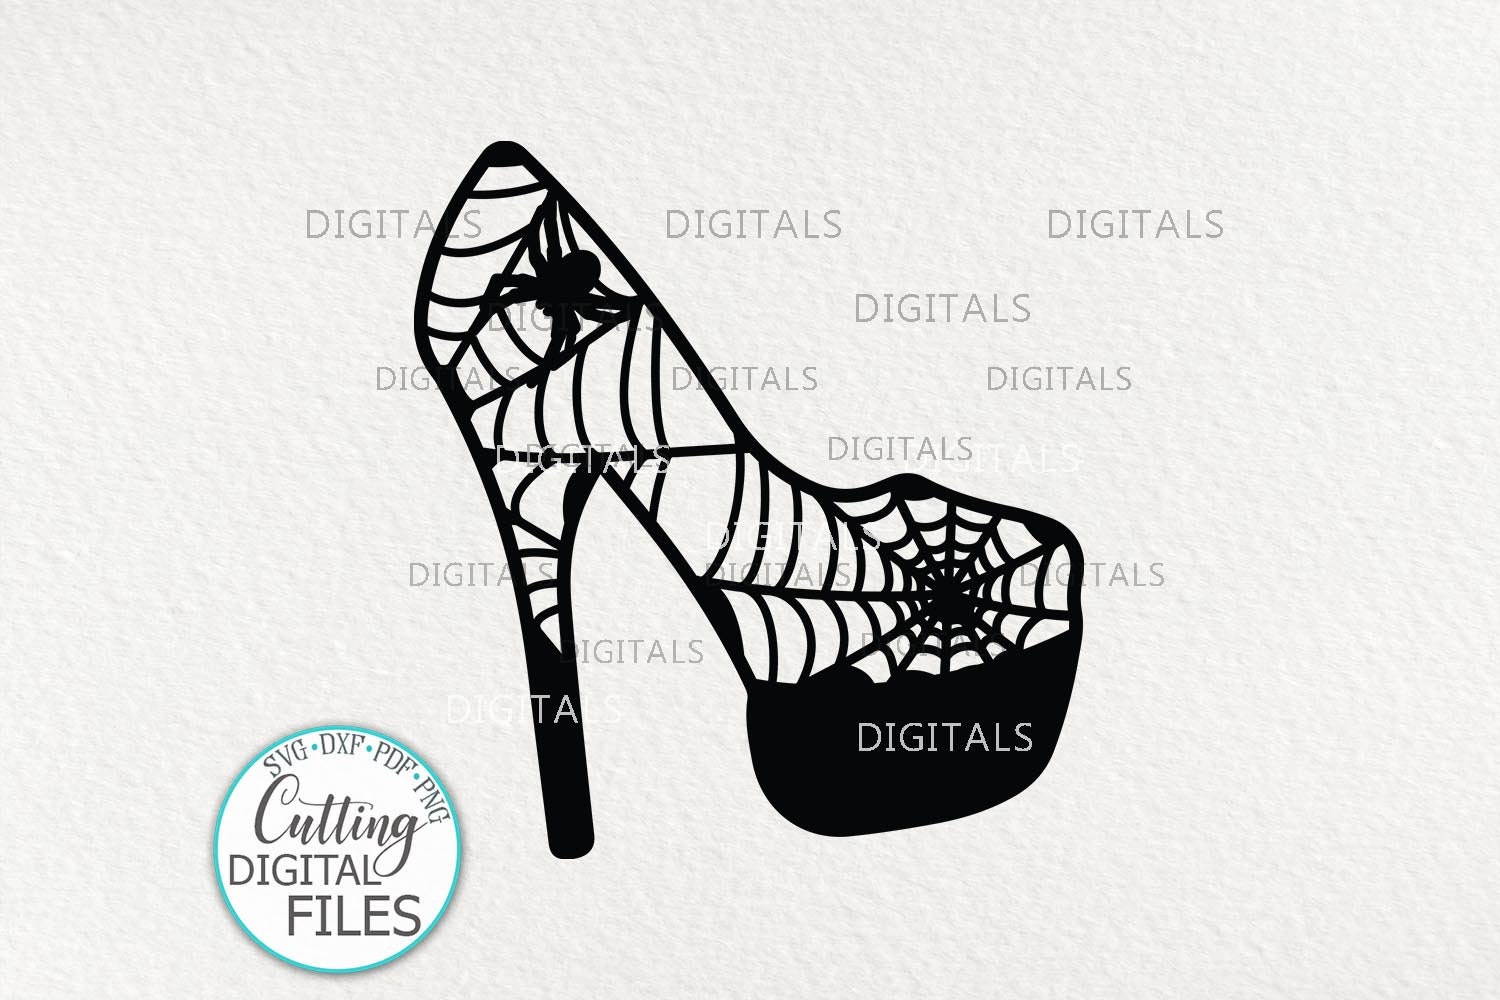 High heel clipart, Halloween svg, Cut file, witch shoes